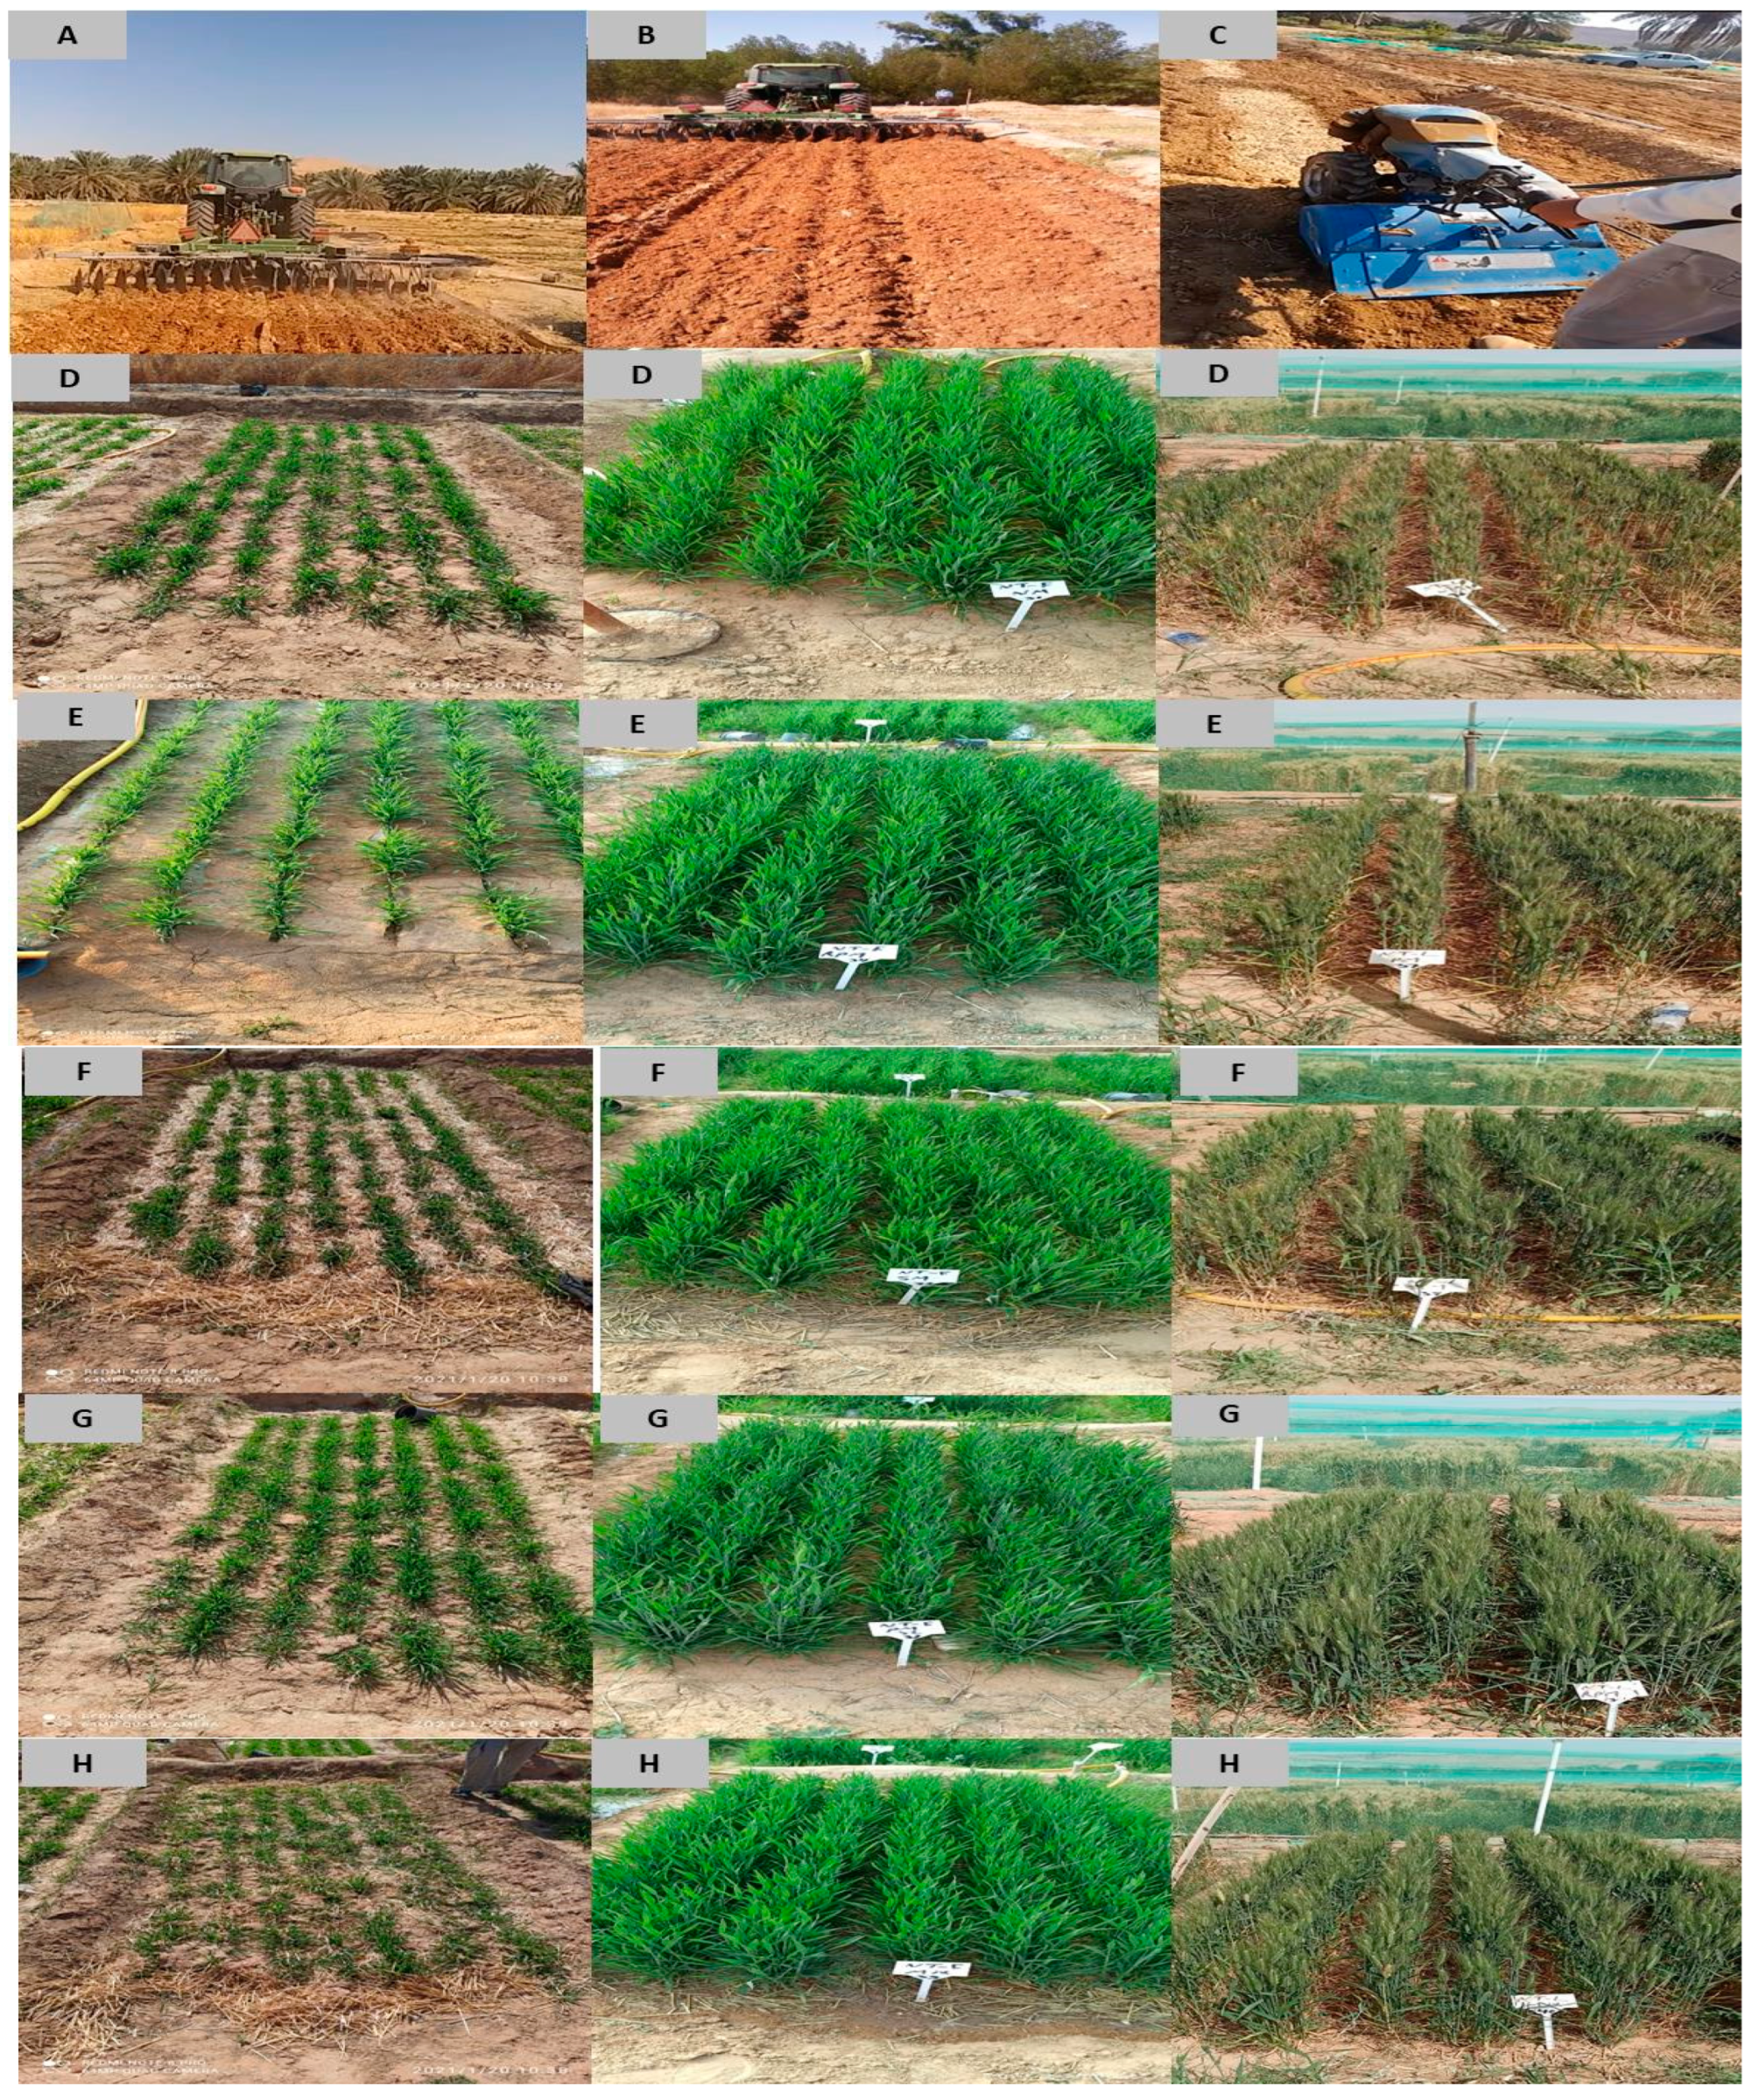 Agronomy | Free Full-Text | Integrating Tillage and Mulching Practices as  an Avenue to Promote Soil Water Storage, Growth, Production, and Water  Productivity of Wheat under Deficit Irrigation in Arid Countries